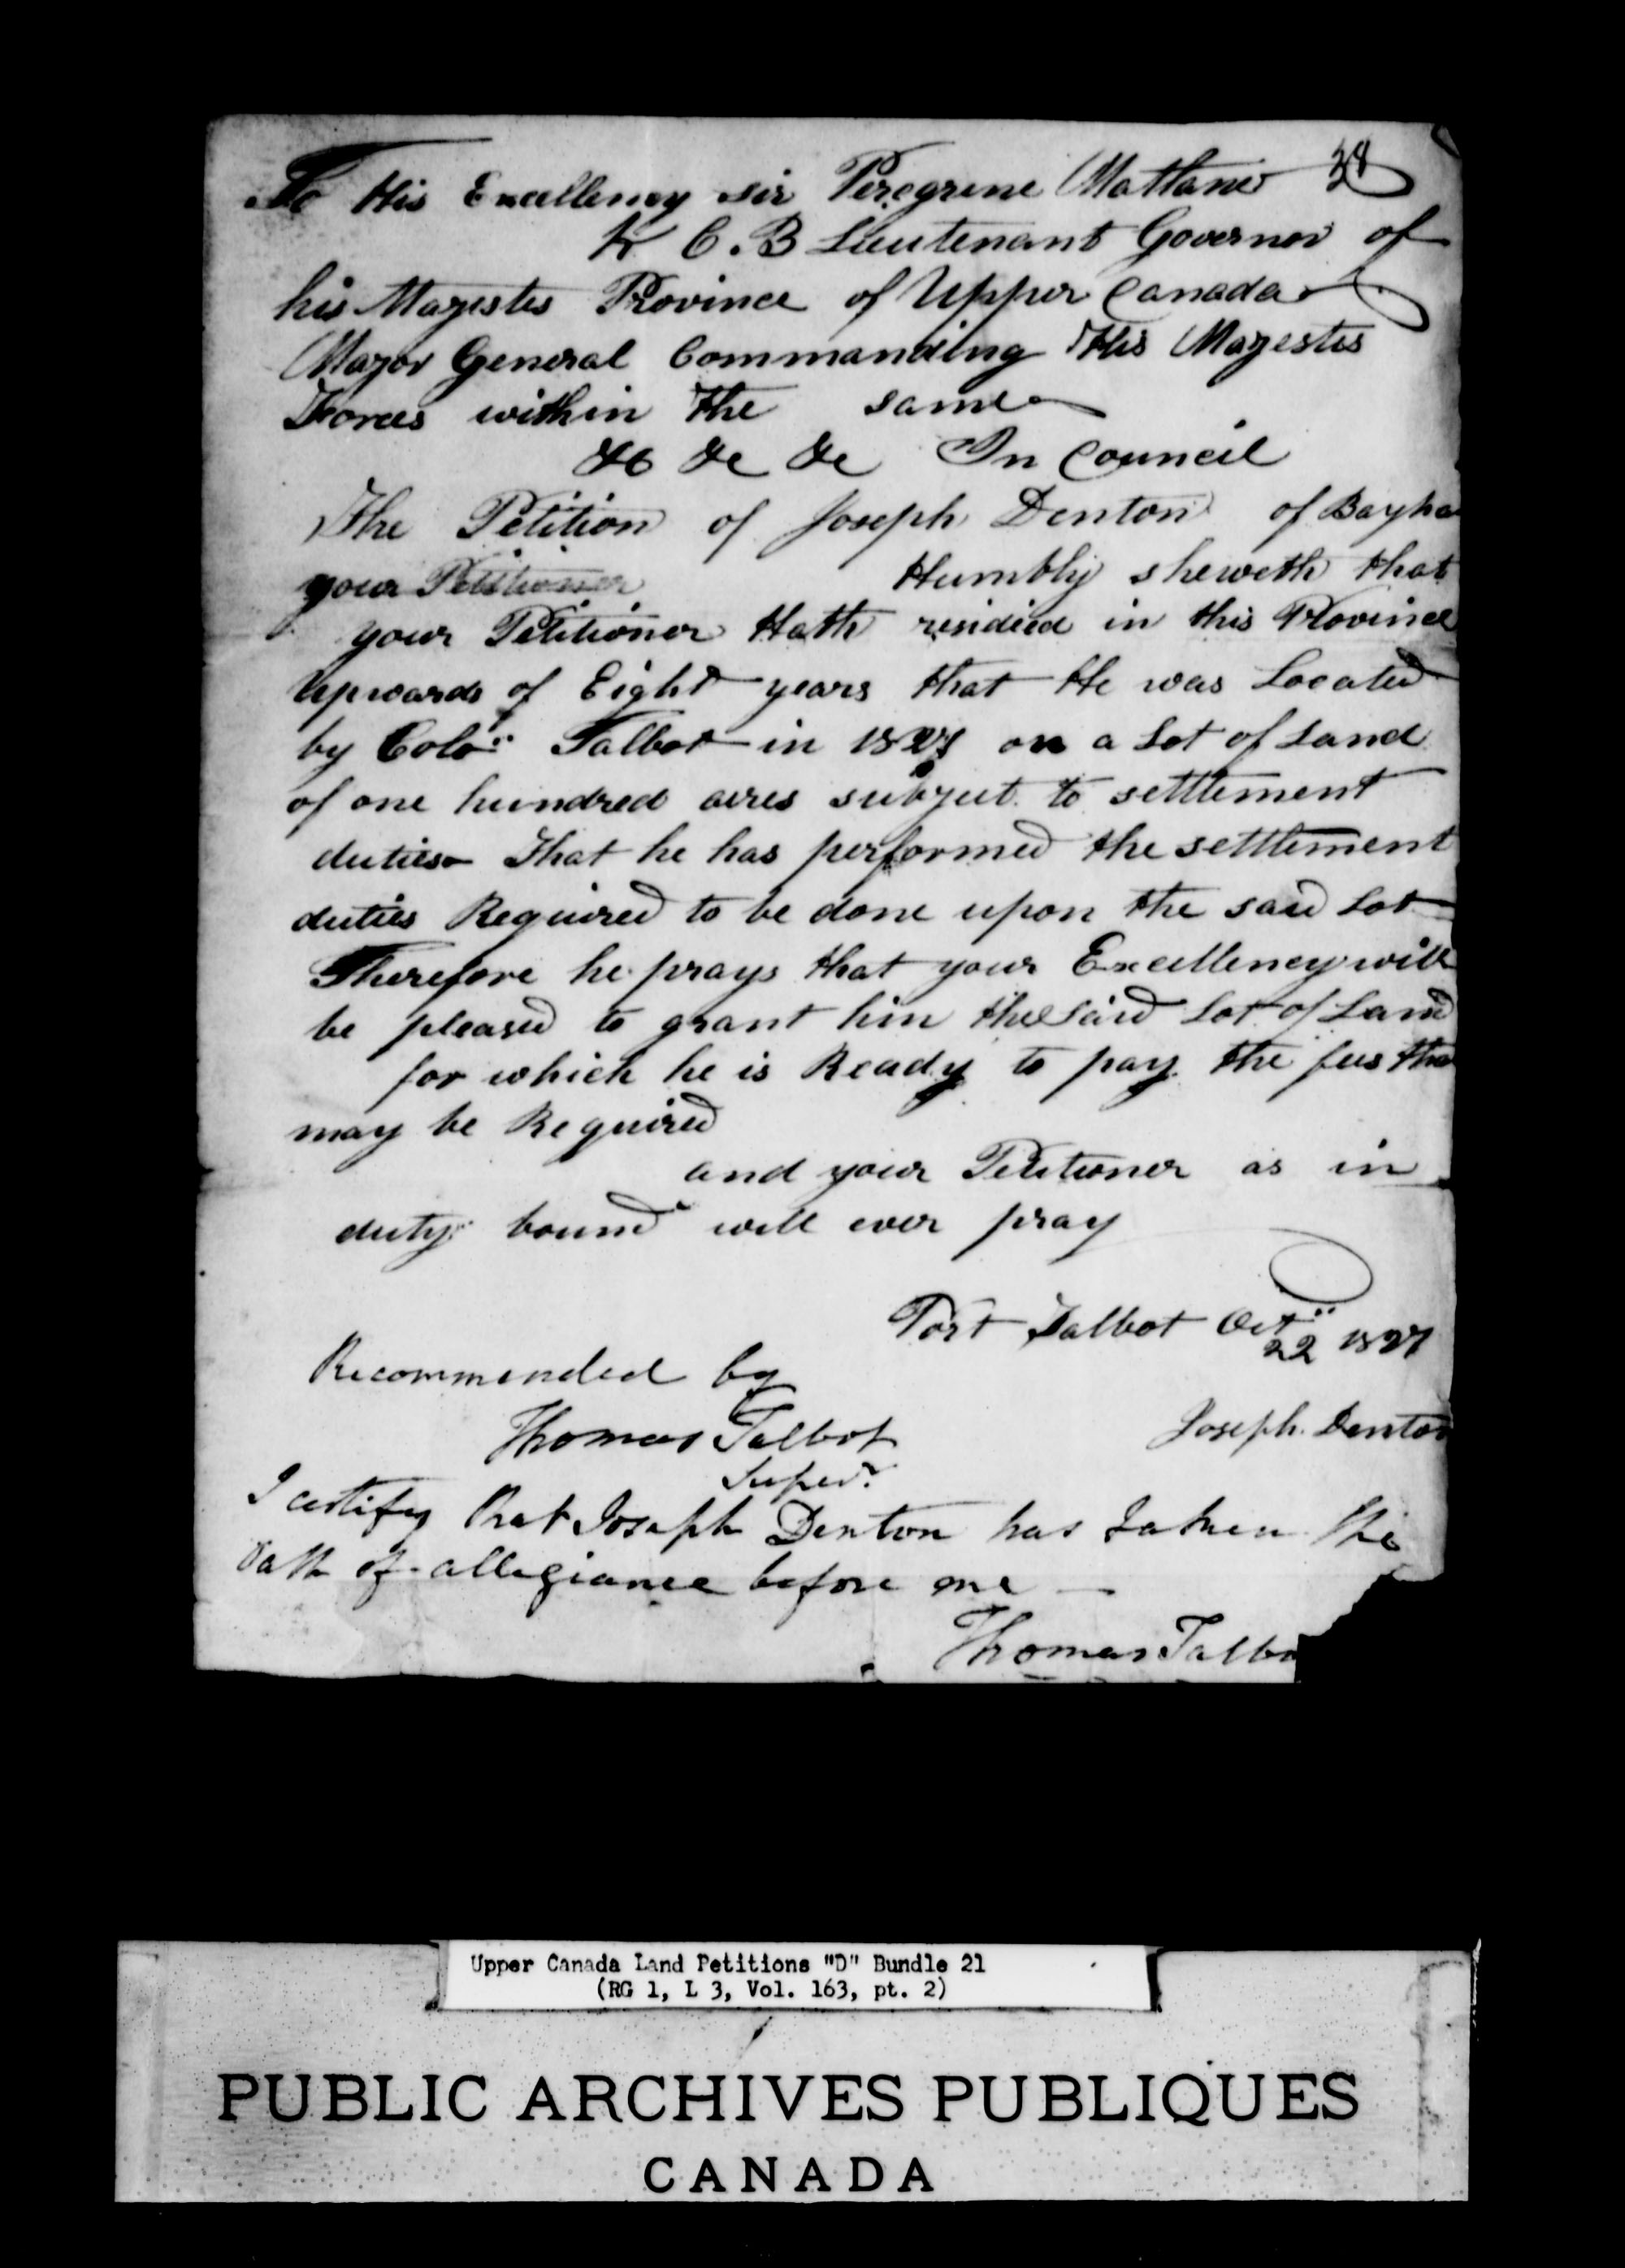 Title: Upper Canada Land Petitions (1763-1865) - Mikan Number: 205131 - Microform: c-1879